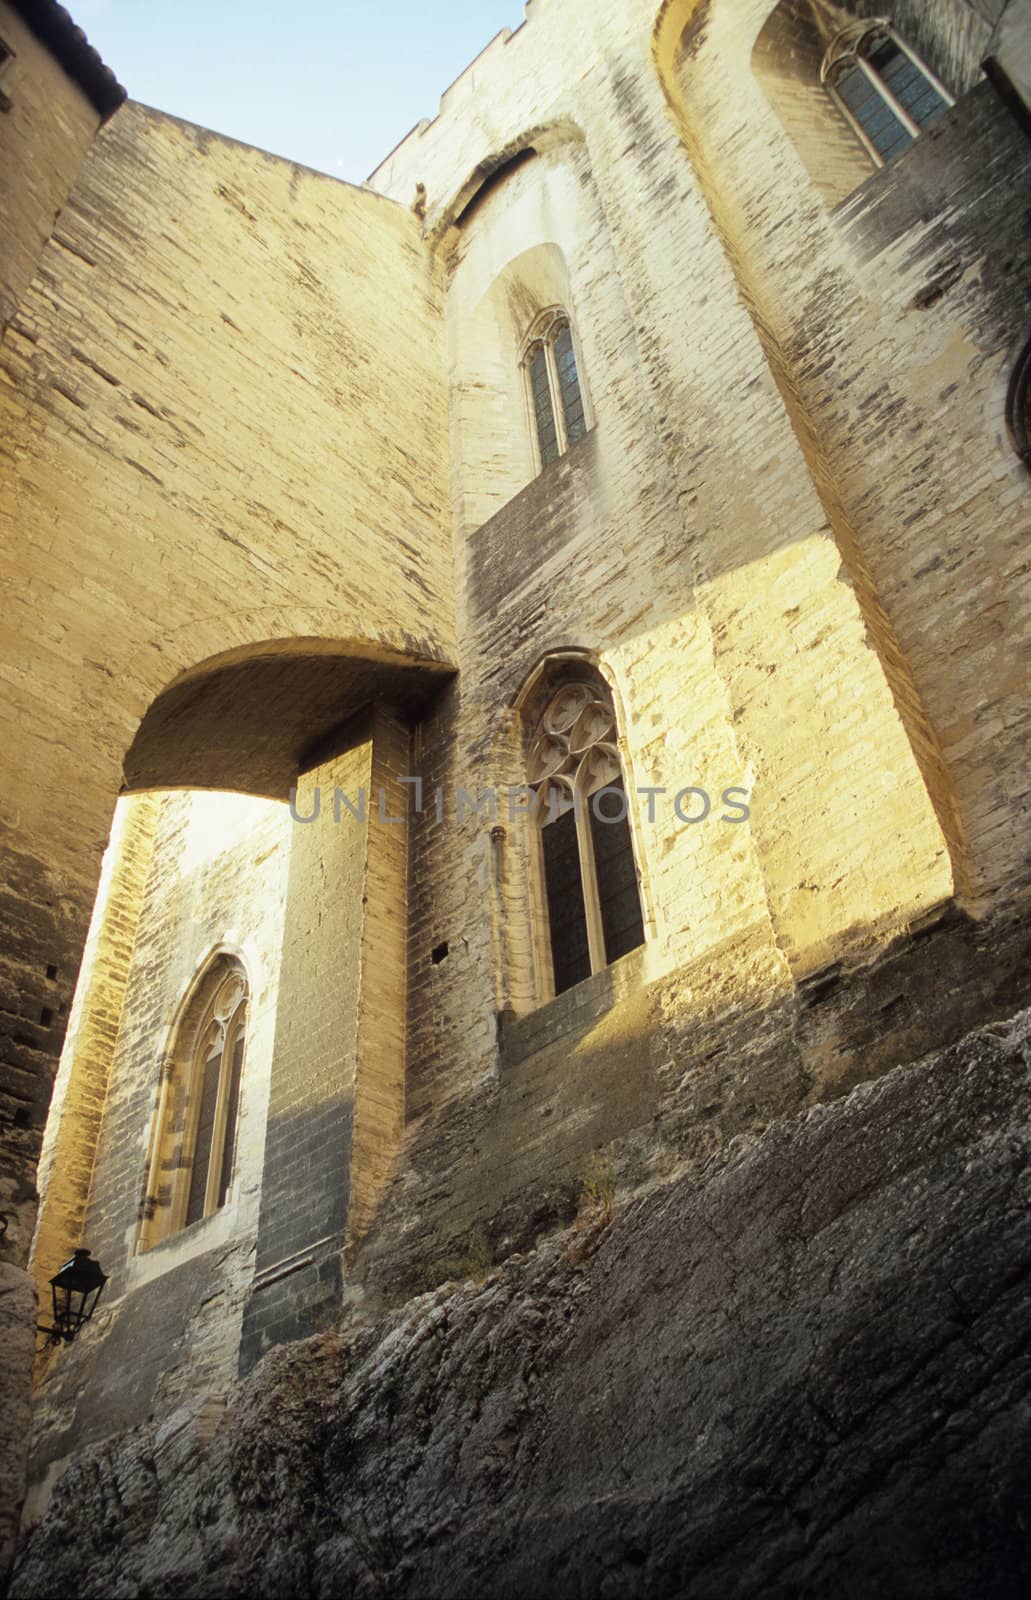 Ached windows and corridors of the massive stone Papal Palace in Avignon, France.